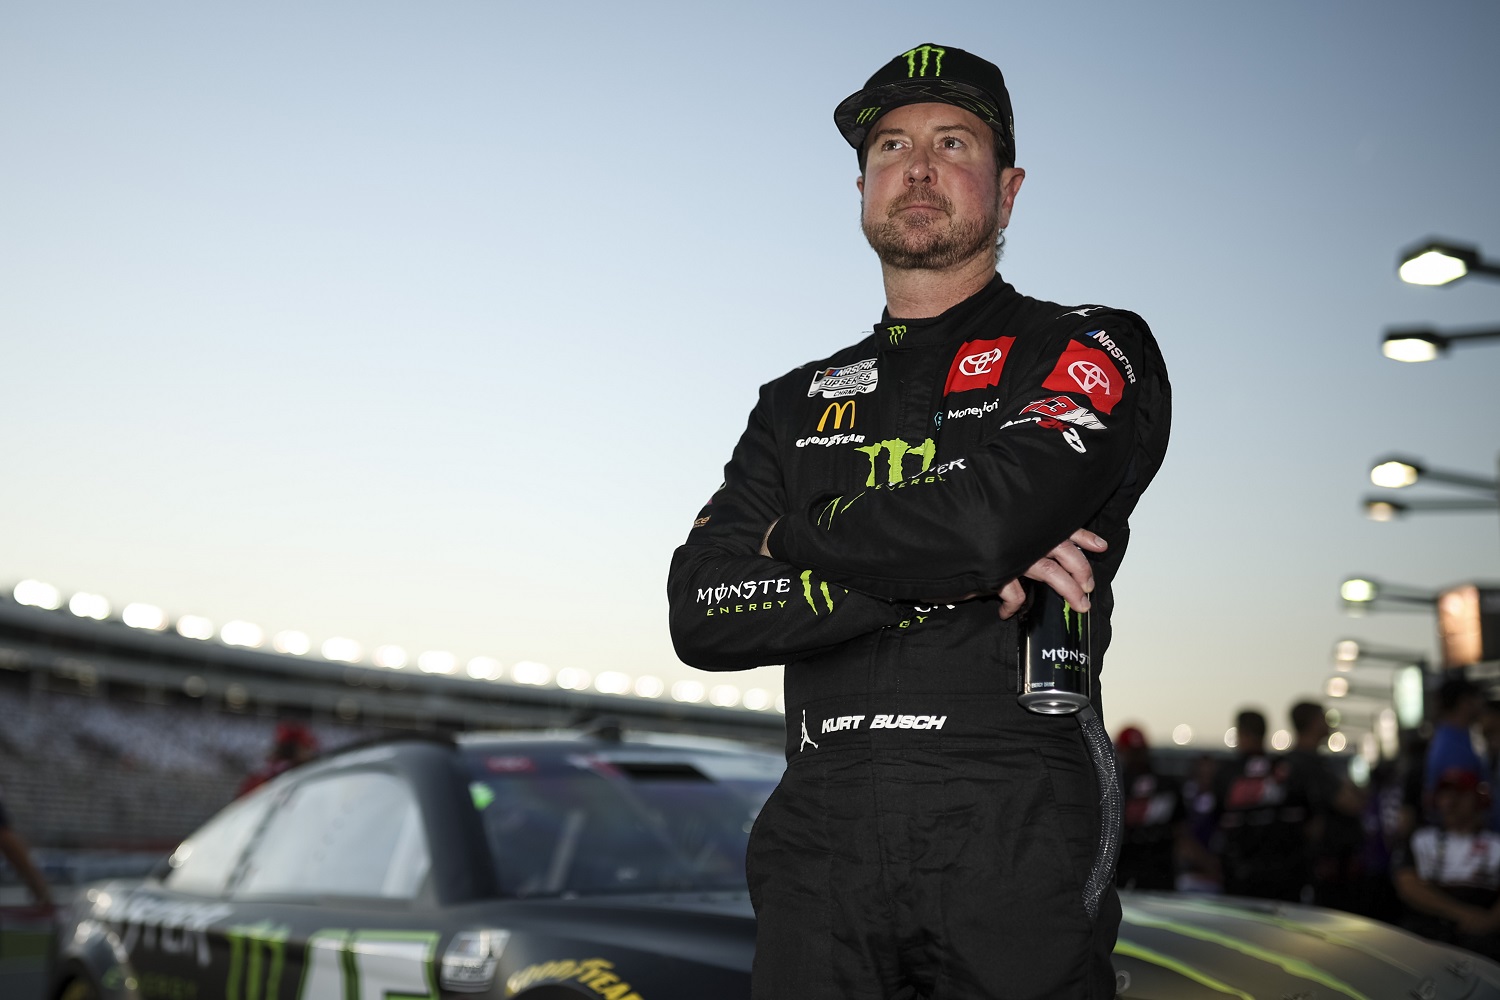 Kurt Busch looks on from the grid during practice for the NASCAR Cup Series Coca-Cola 600 at Charlotte Motor Speedway on May 28, 2022 in Concord, North Carolina.